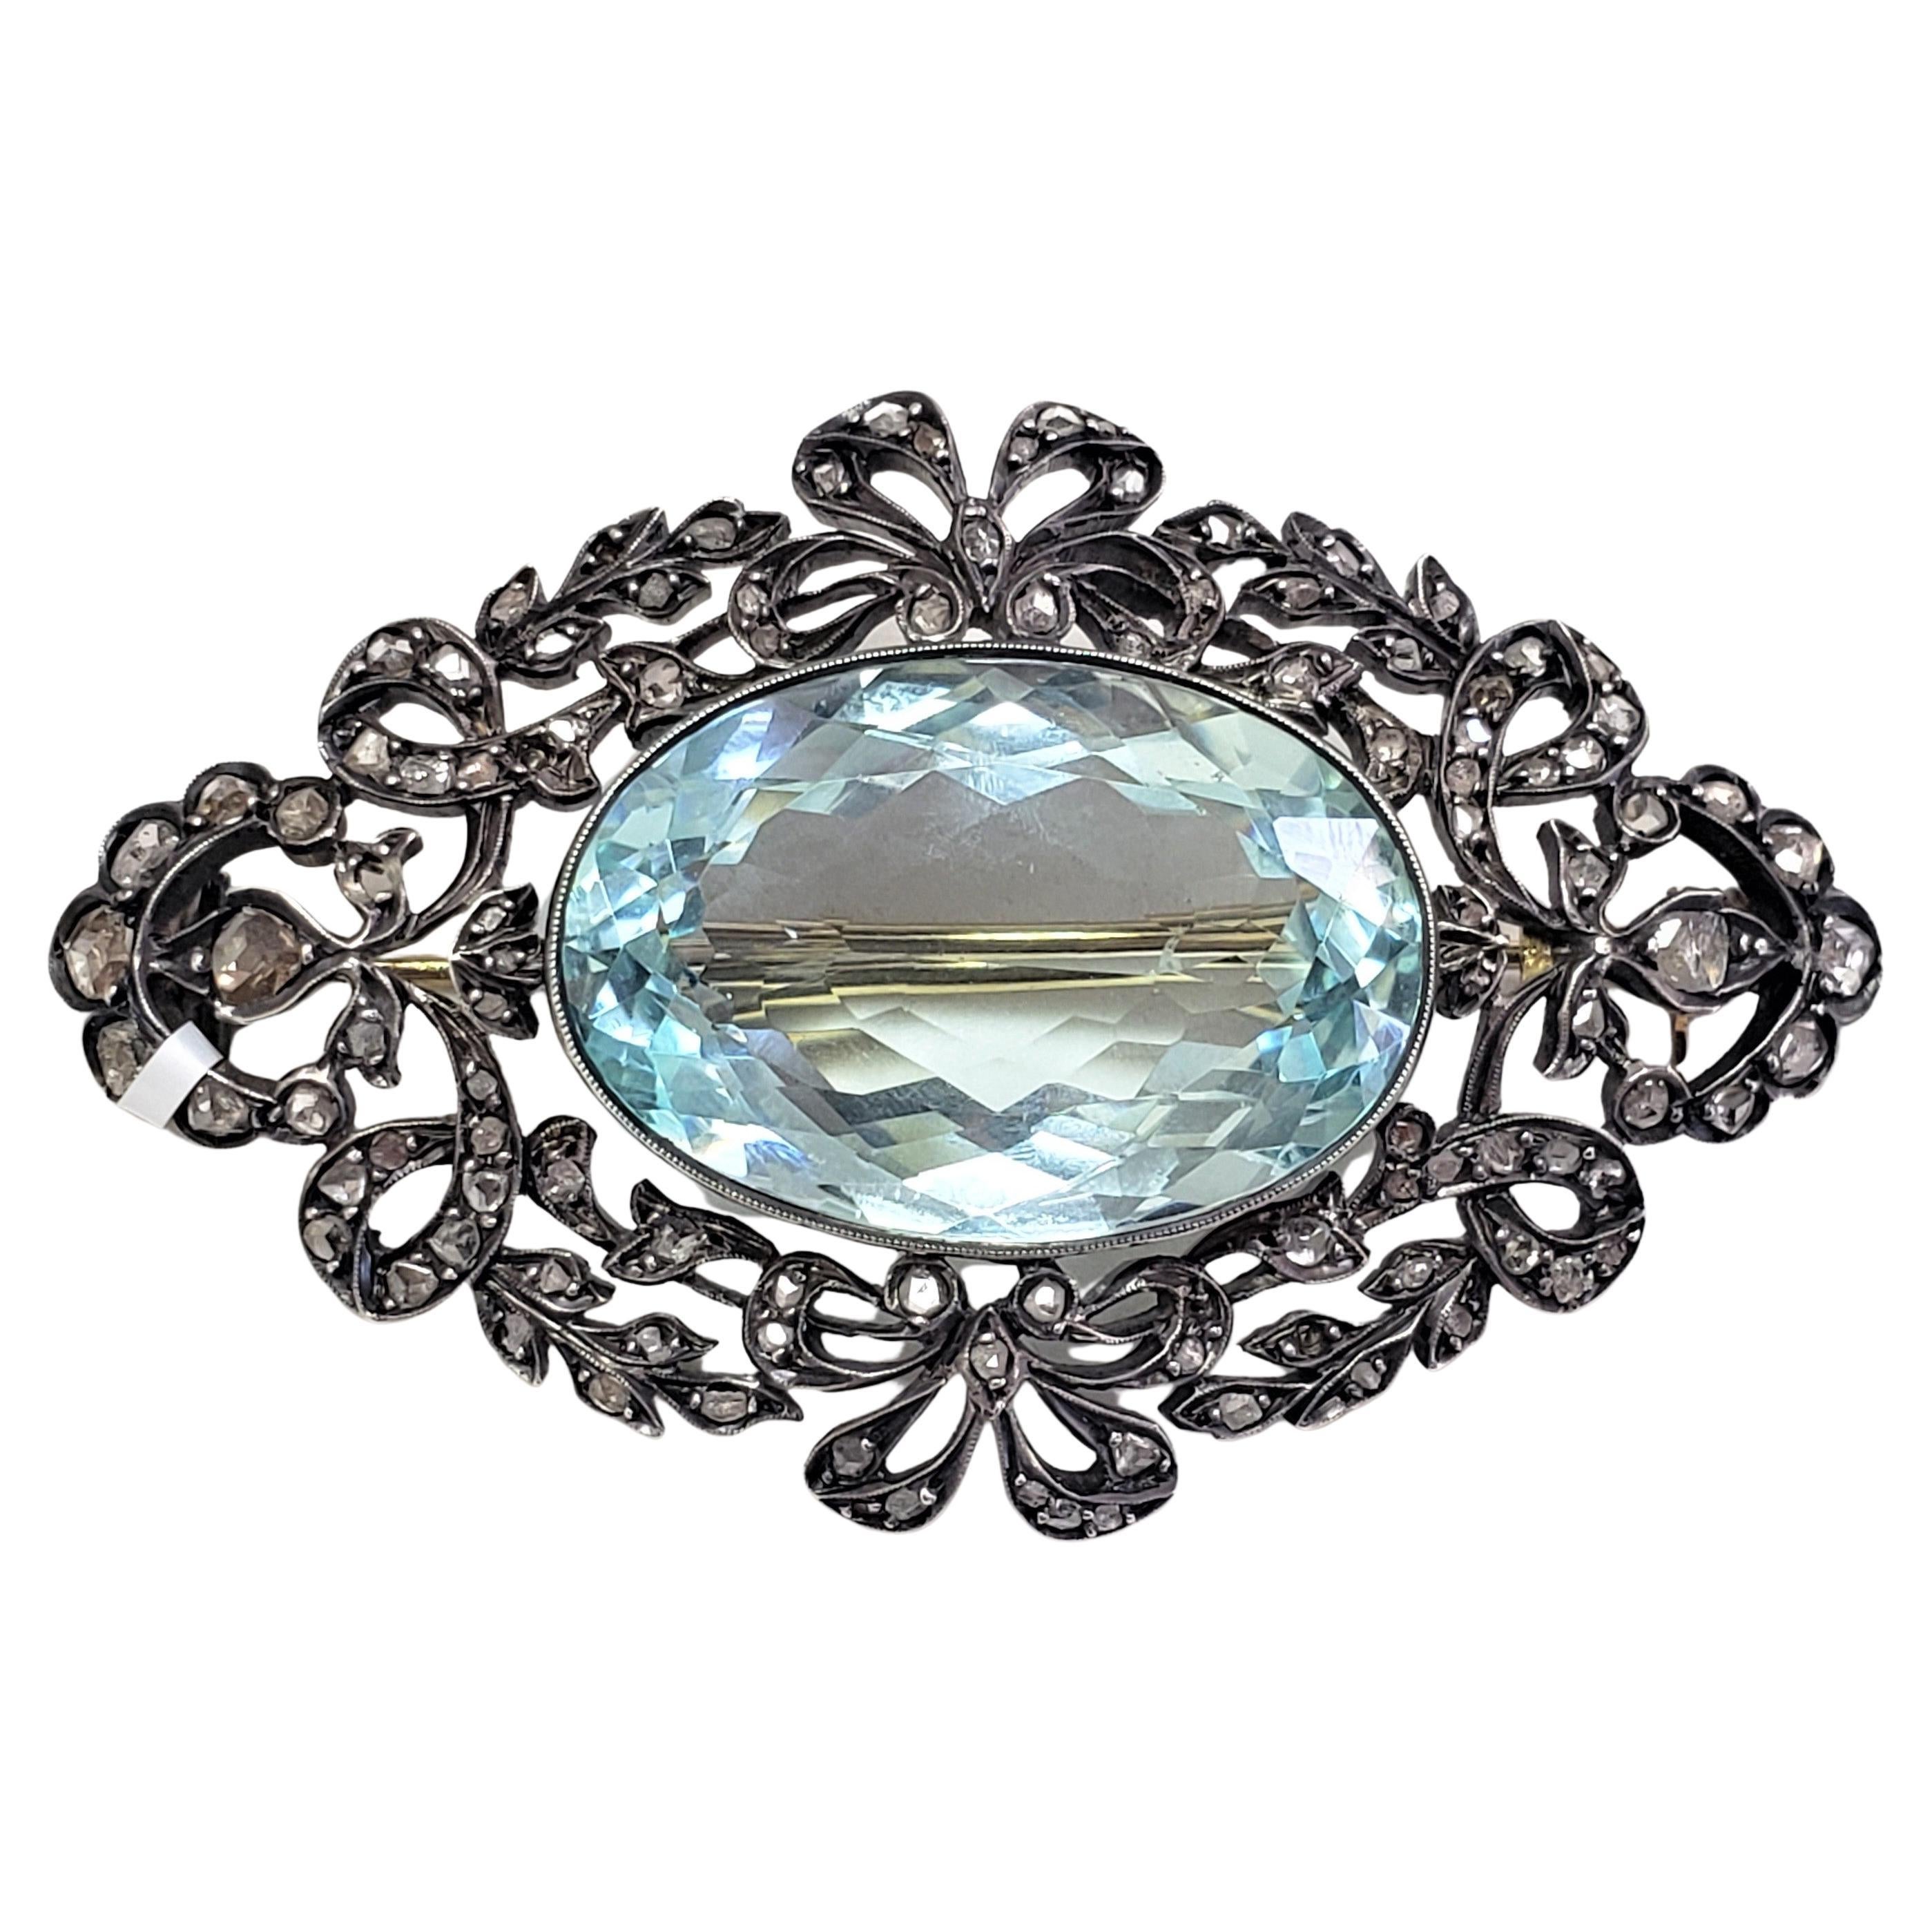 55.00CT Aquamarine Brooch Silver over Gold C. Dunaigre Lab. For Sale